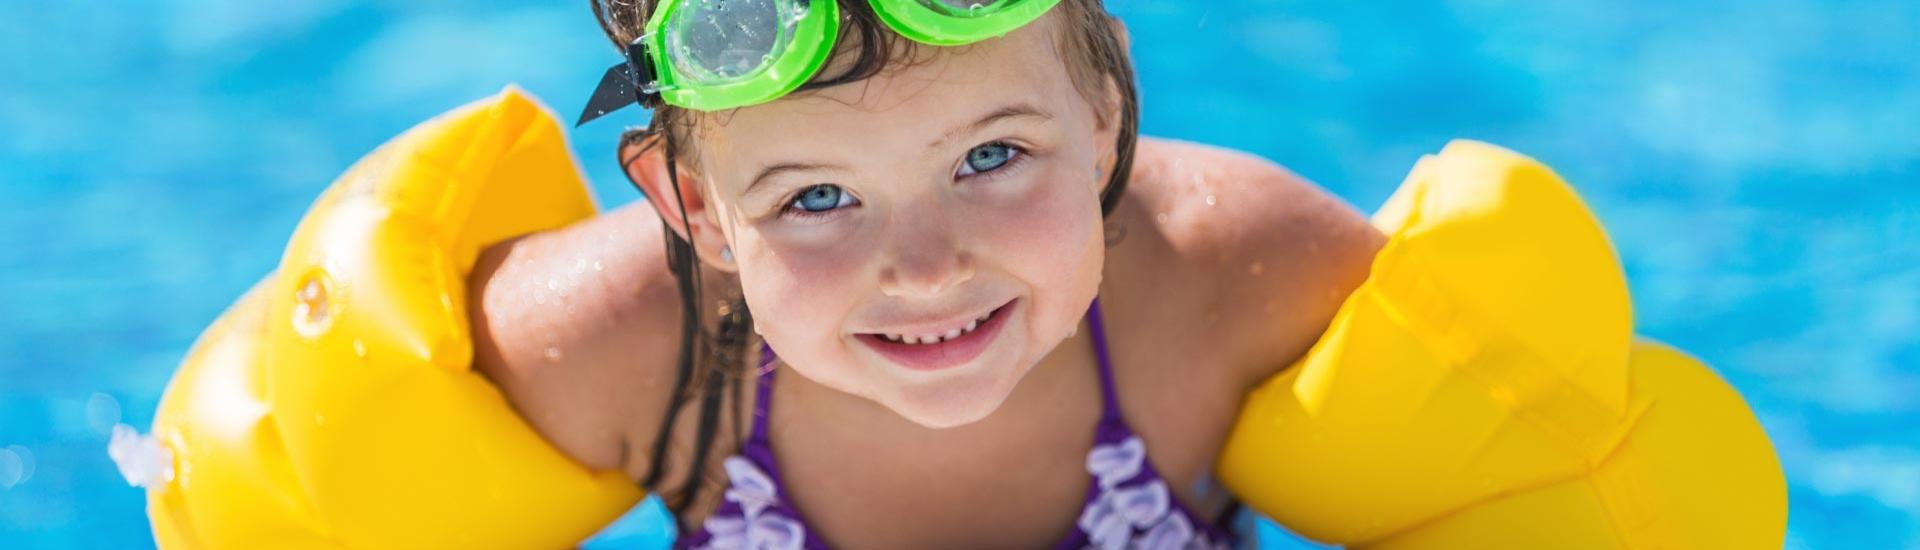 Girl with yellow armbands and green goggles in the pool.